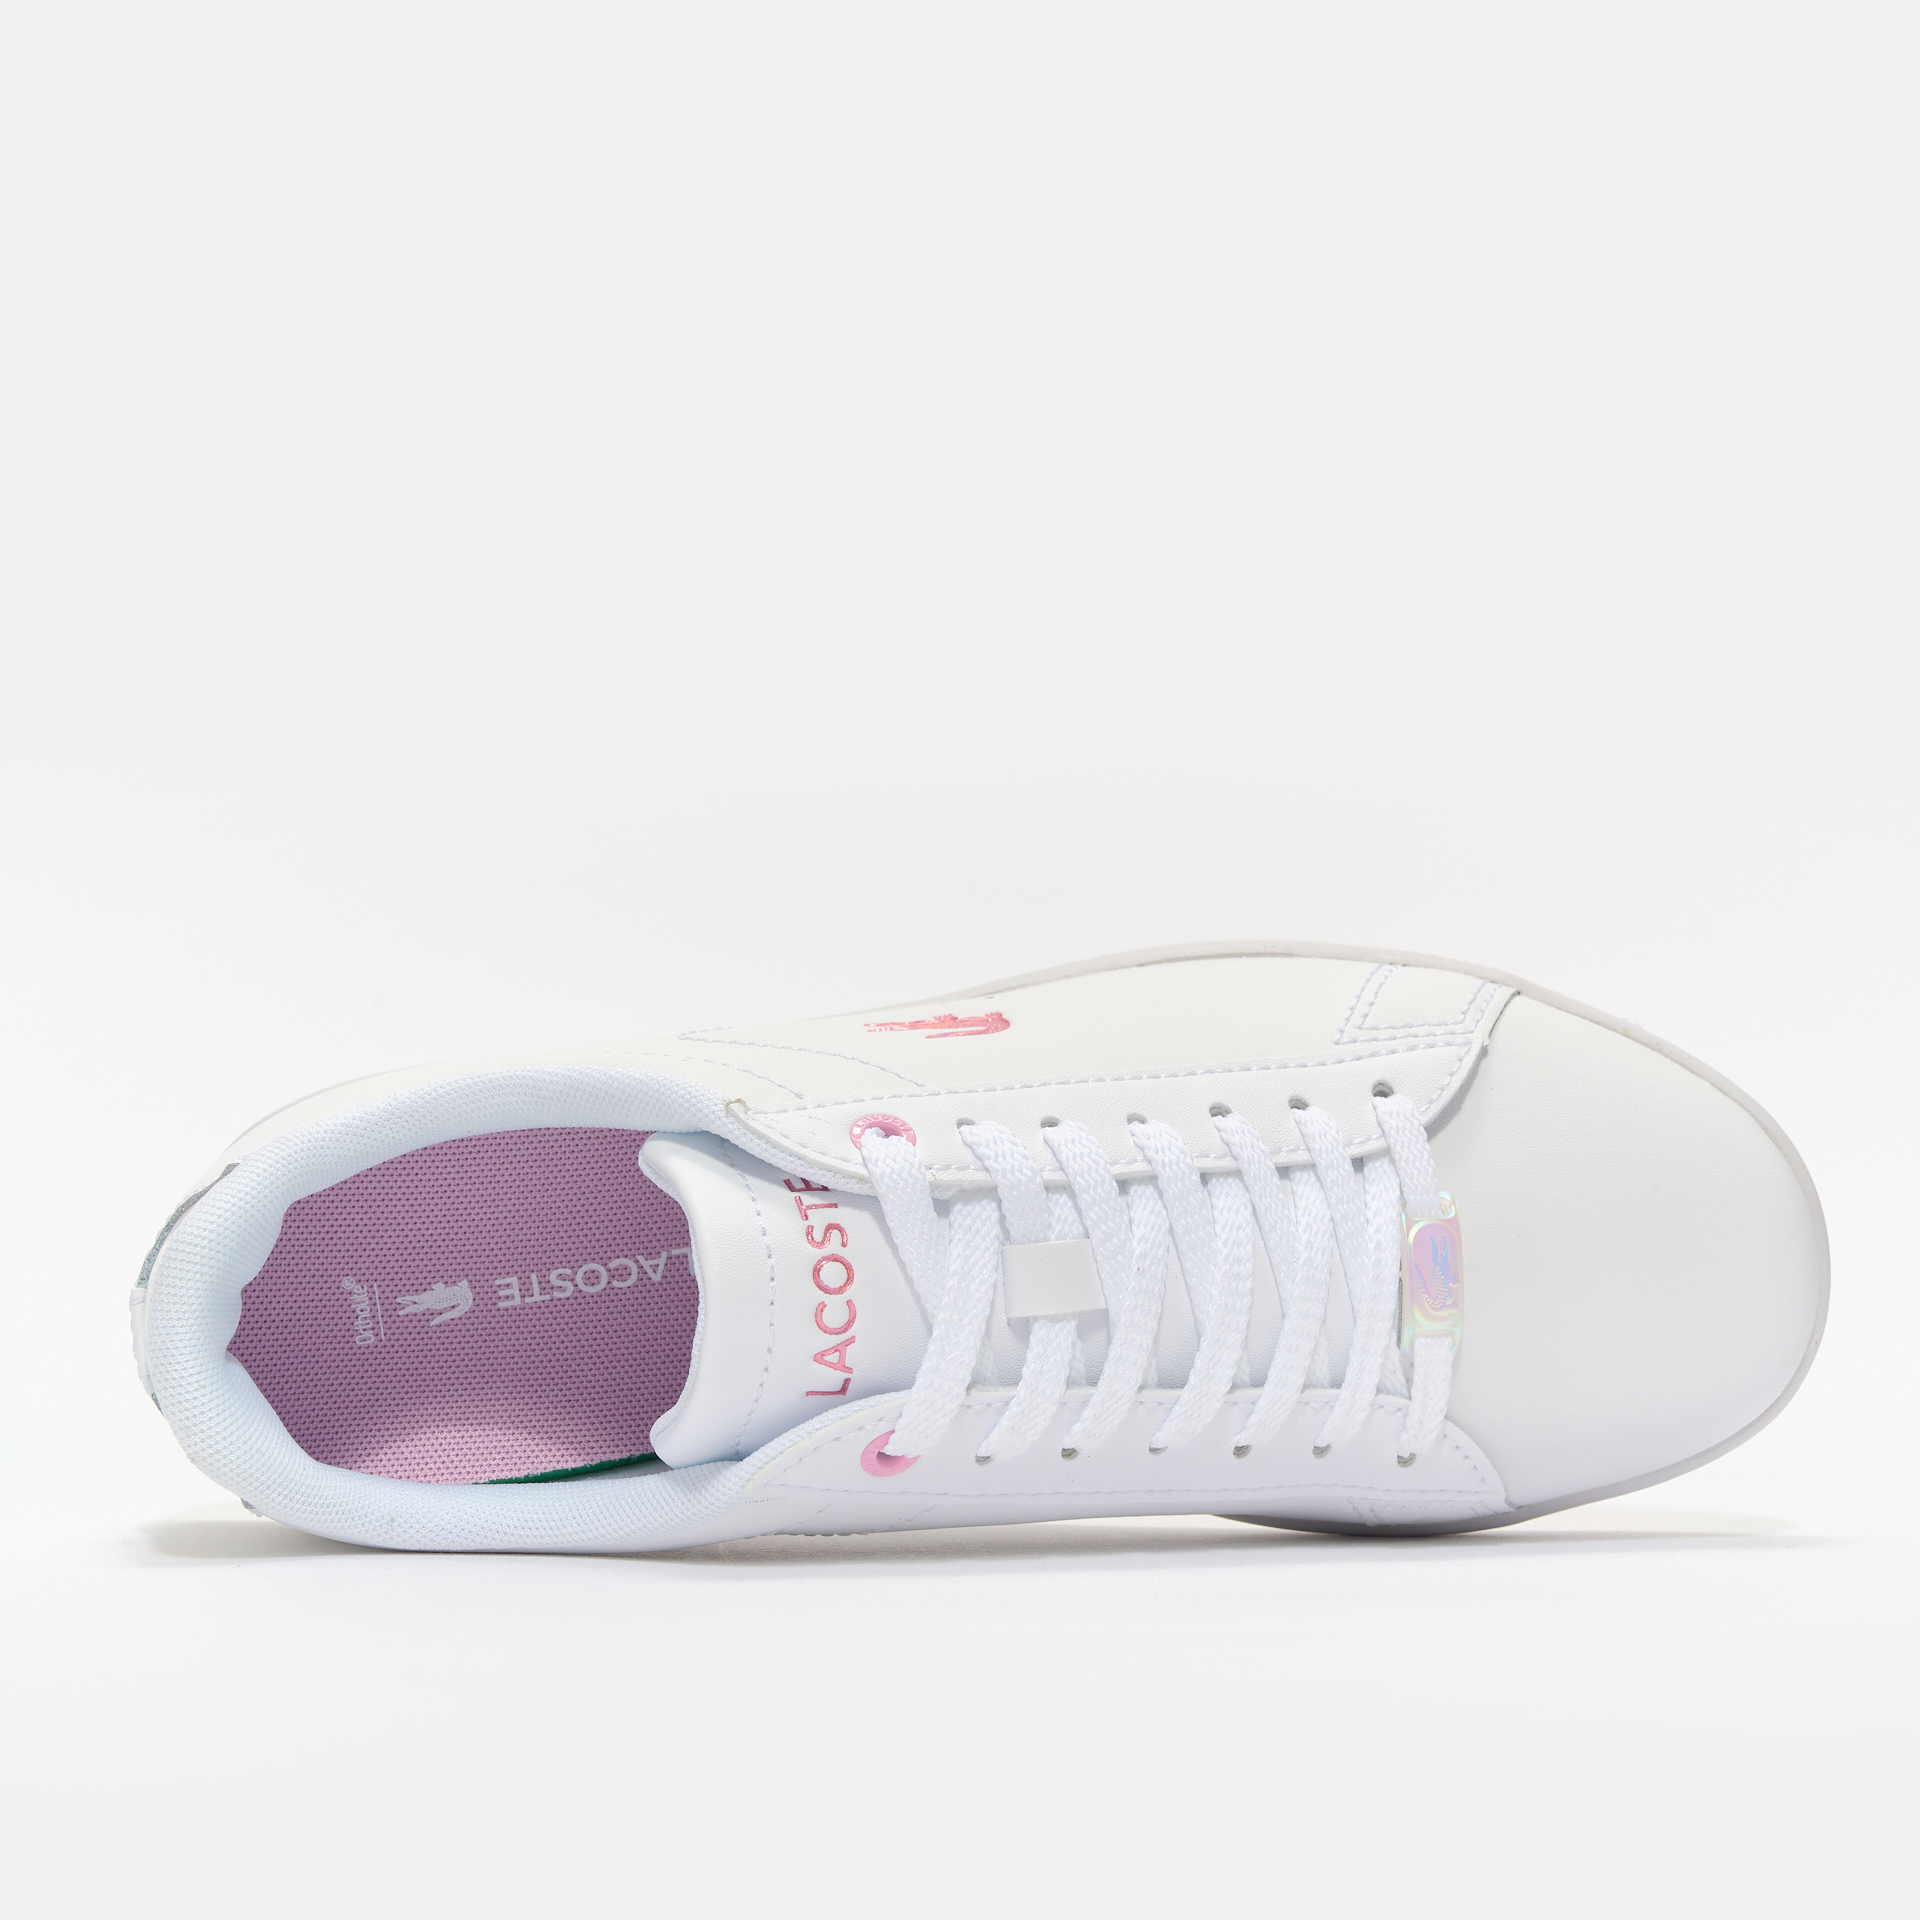 Lacoste Carnaby 222 Sneaker White/White